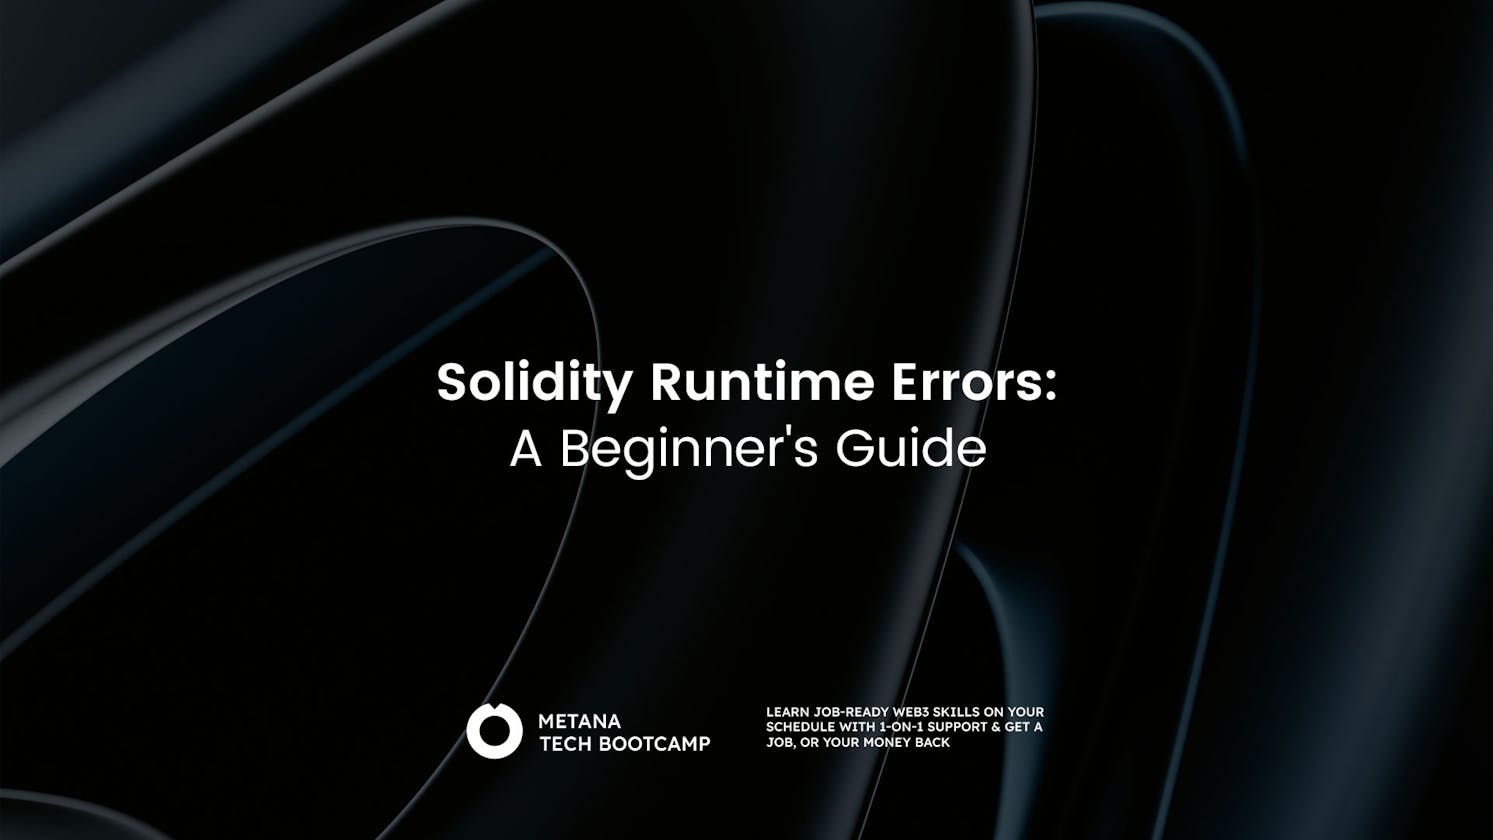 Solidity Runtime Errors: A Beginner’s Guide